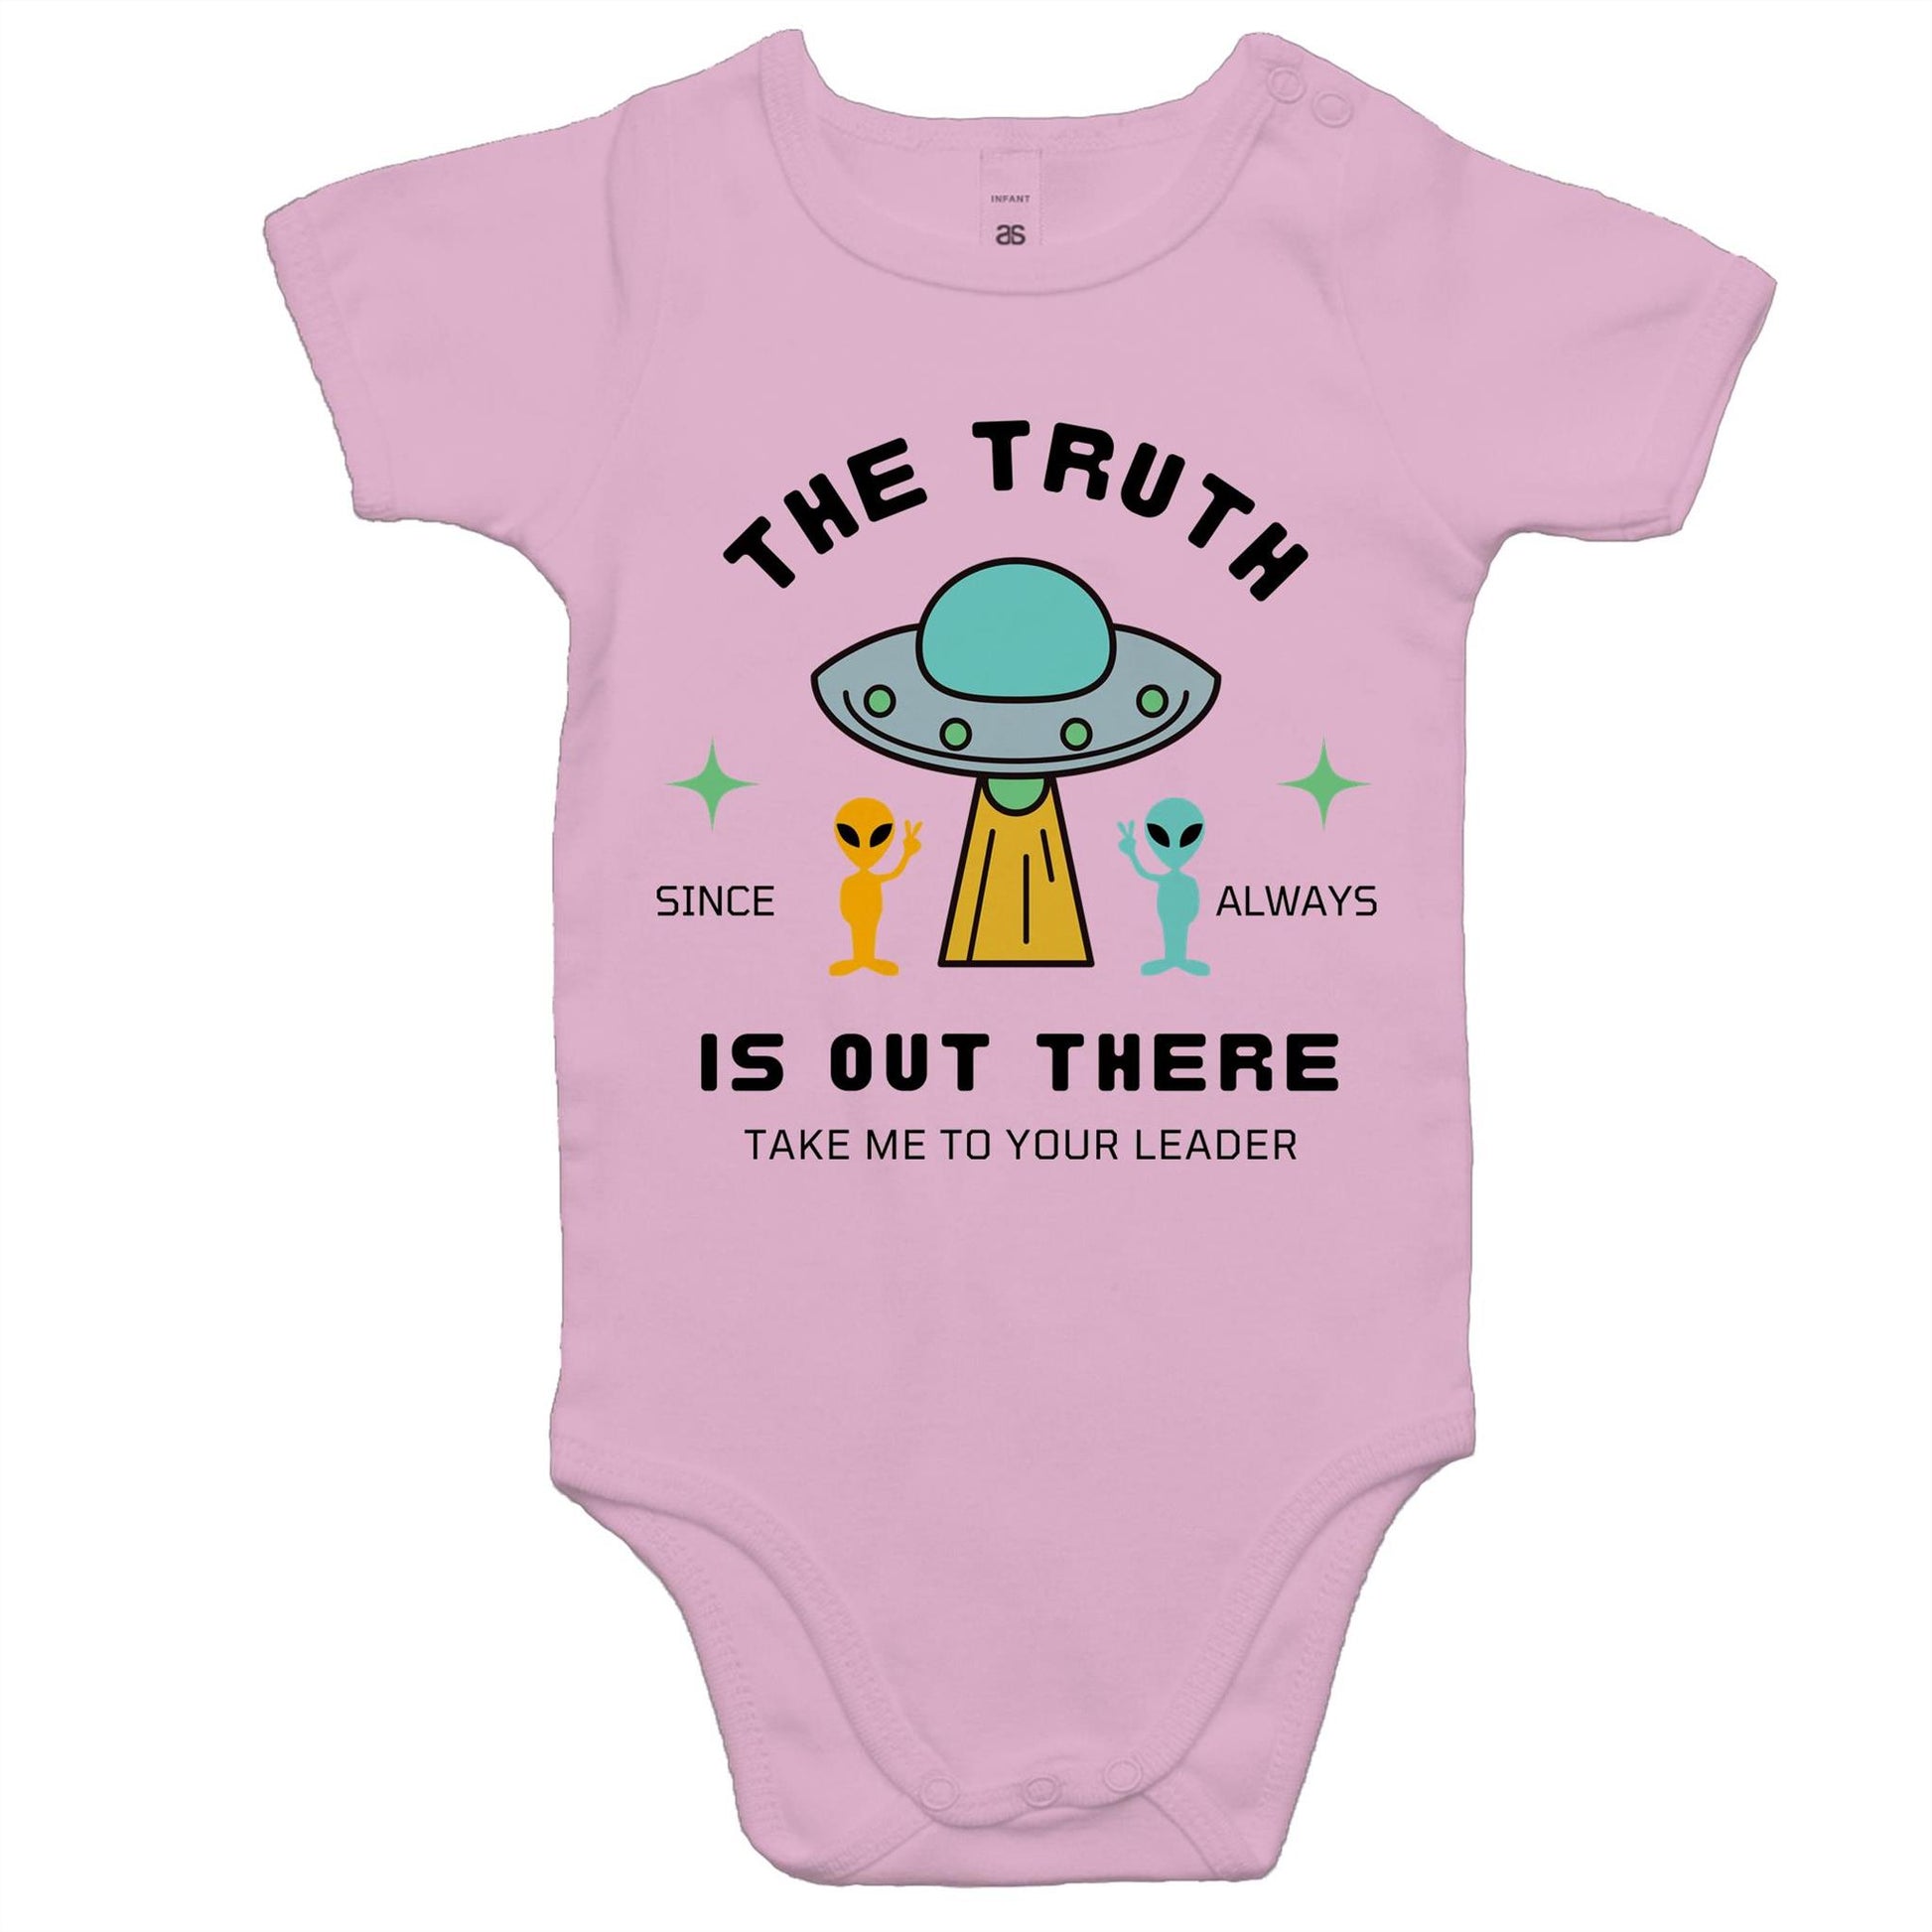 The Truth Is Out There - Baby Bodysuit Pink Baby Bodysuit Sci Fi